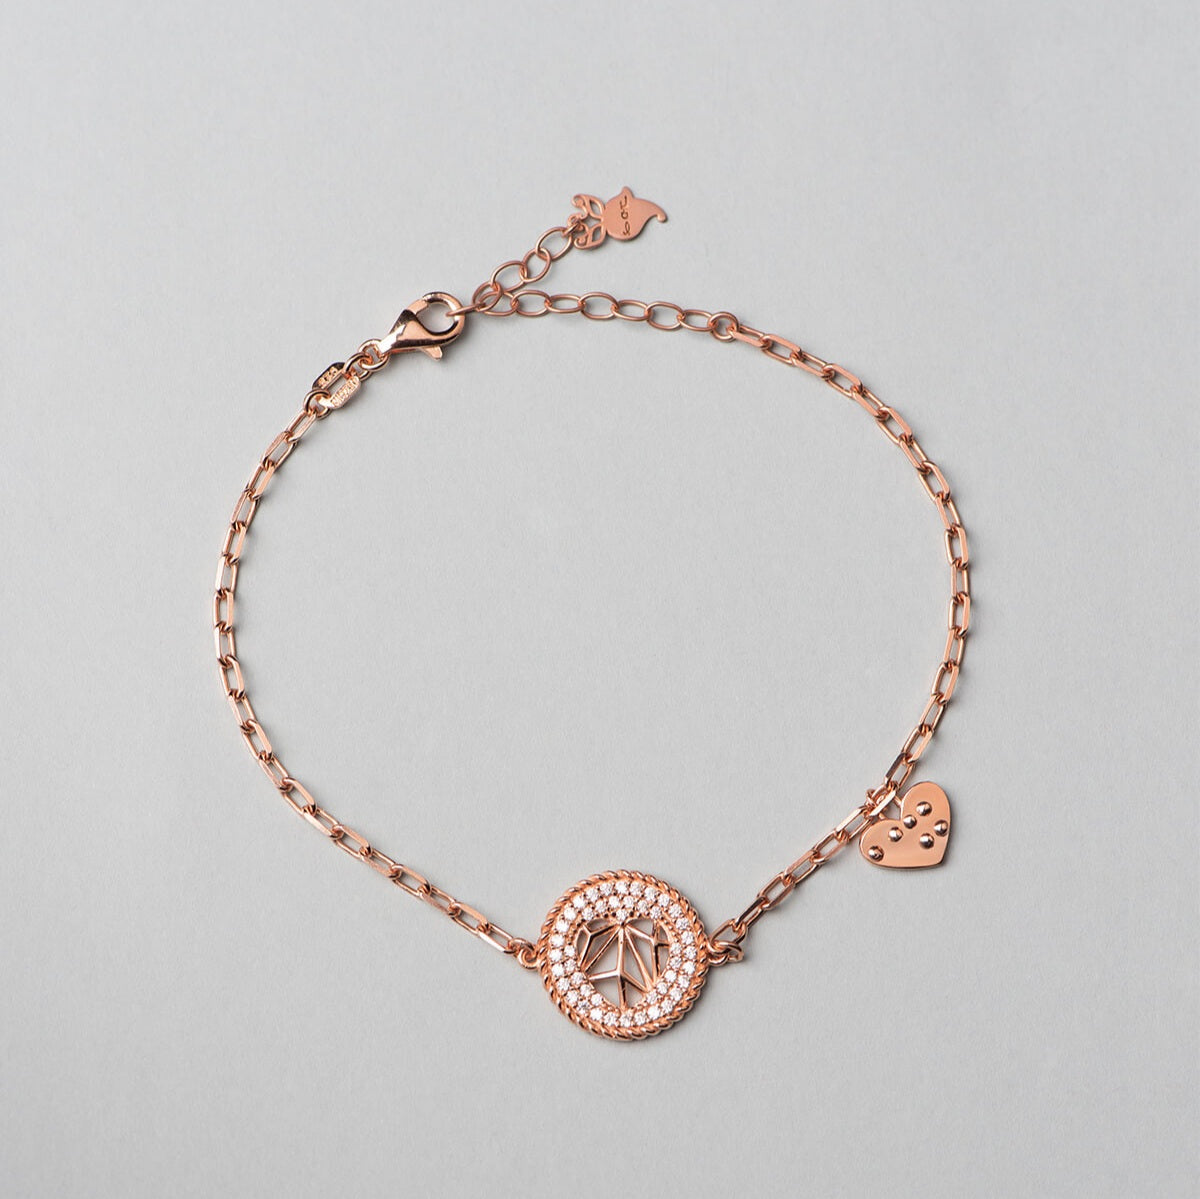 925 sterling silver, rose gold plated bracelet with zirconia, heart shape pendant.